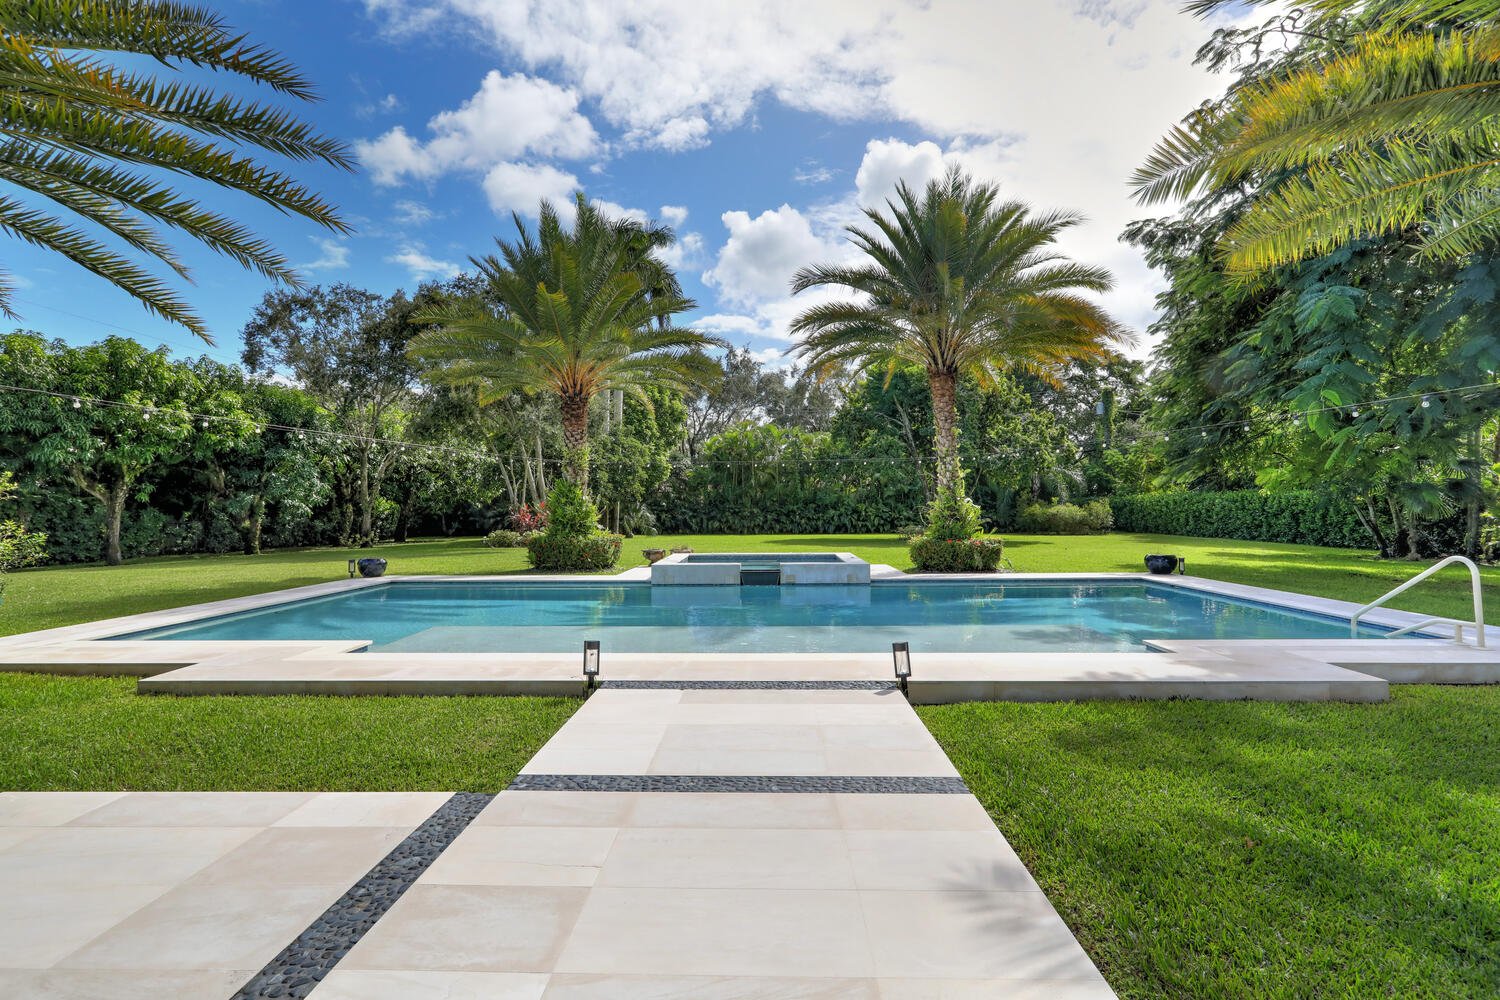 Master Brokers Forum Listing: Check Out This 'Hamptons Meets Key West' Style North Pinecrest Home Asking $5.8 Million 12.jpg